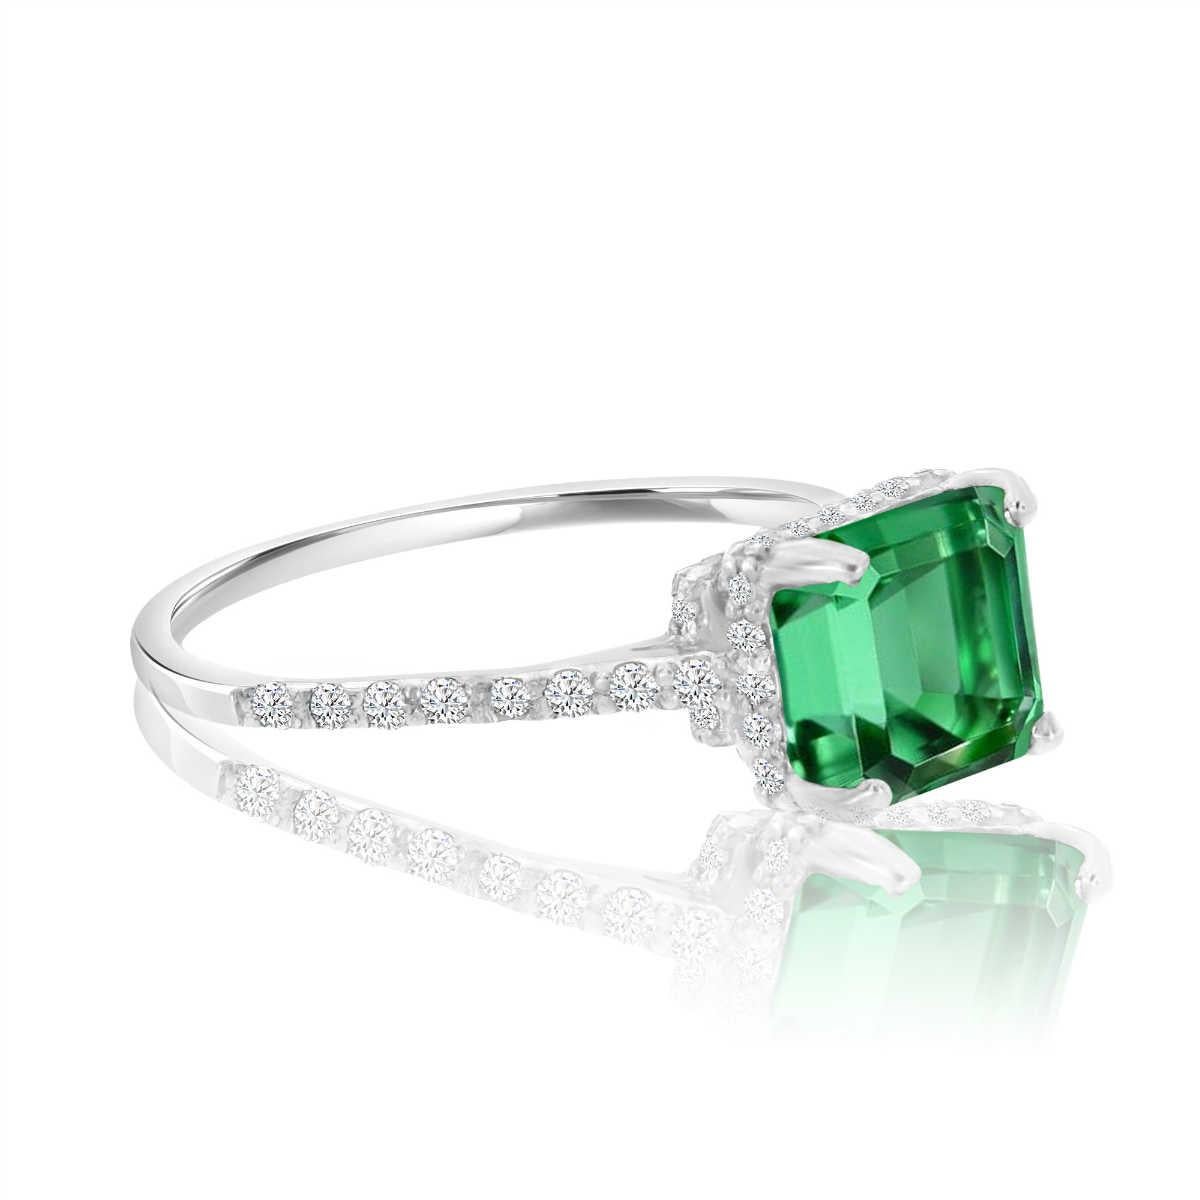 This Pre-Owned delicate platinum ring features a 1.78 Assher cut green emerald set in a four-prong basket crown. The designer set petite round melee diamonds on the crown's double gallery. An additional one row of diamond micro-prong set from each